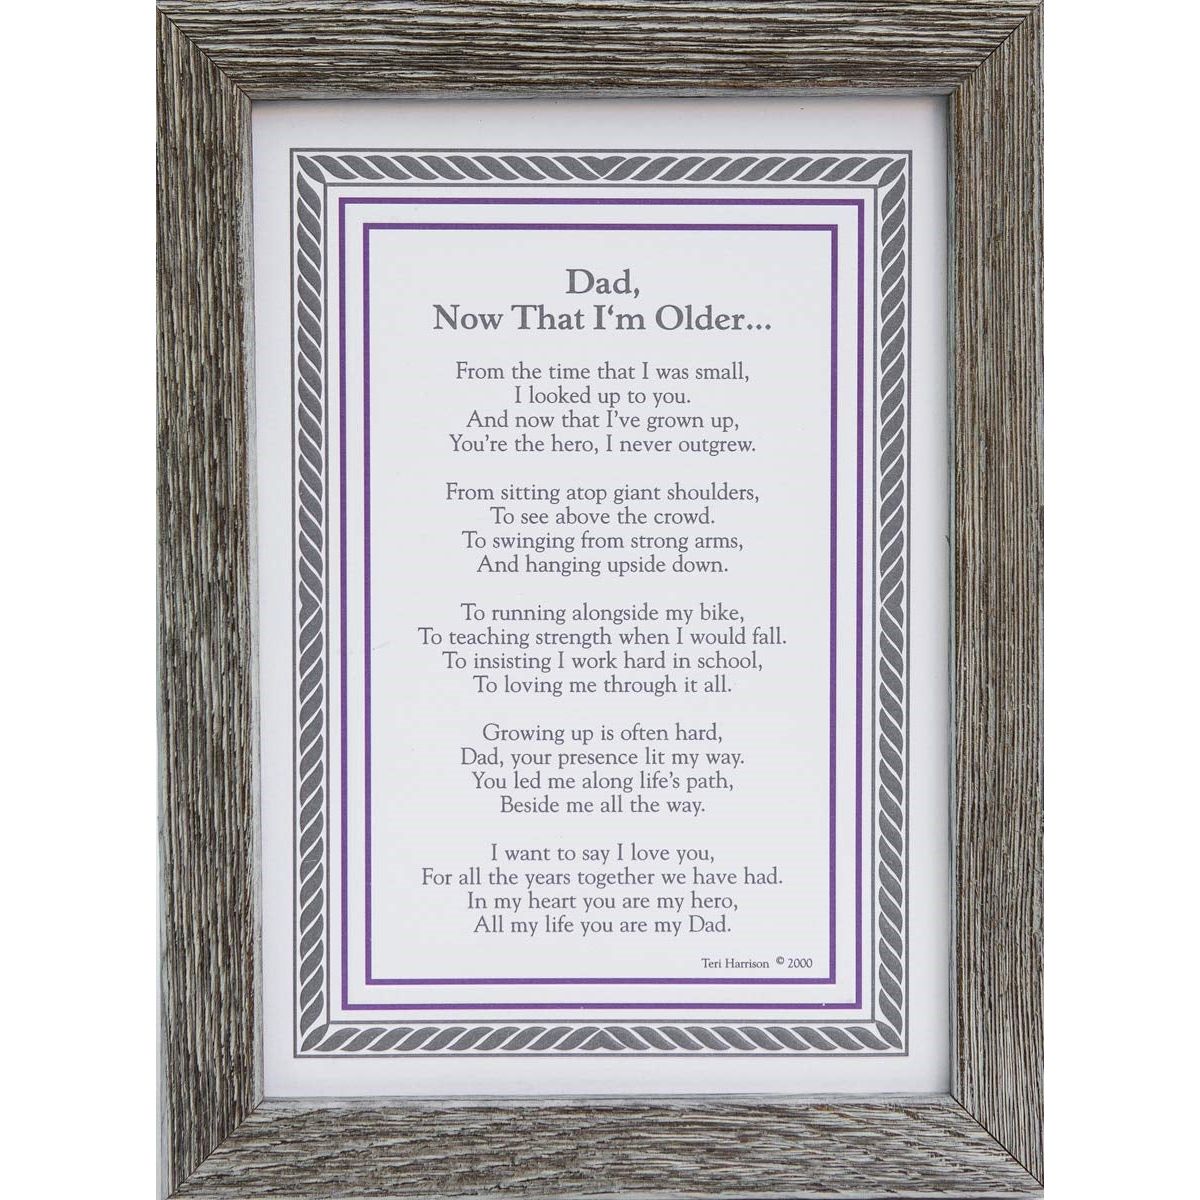 5x7 farmhouse frame with "Dad, Now that I'm Older" poem.